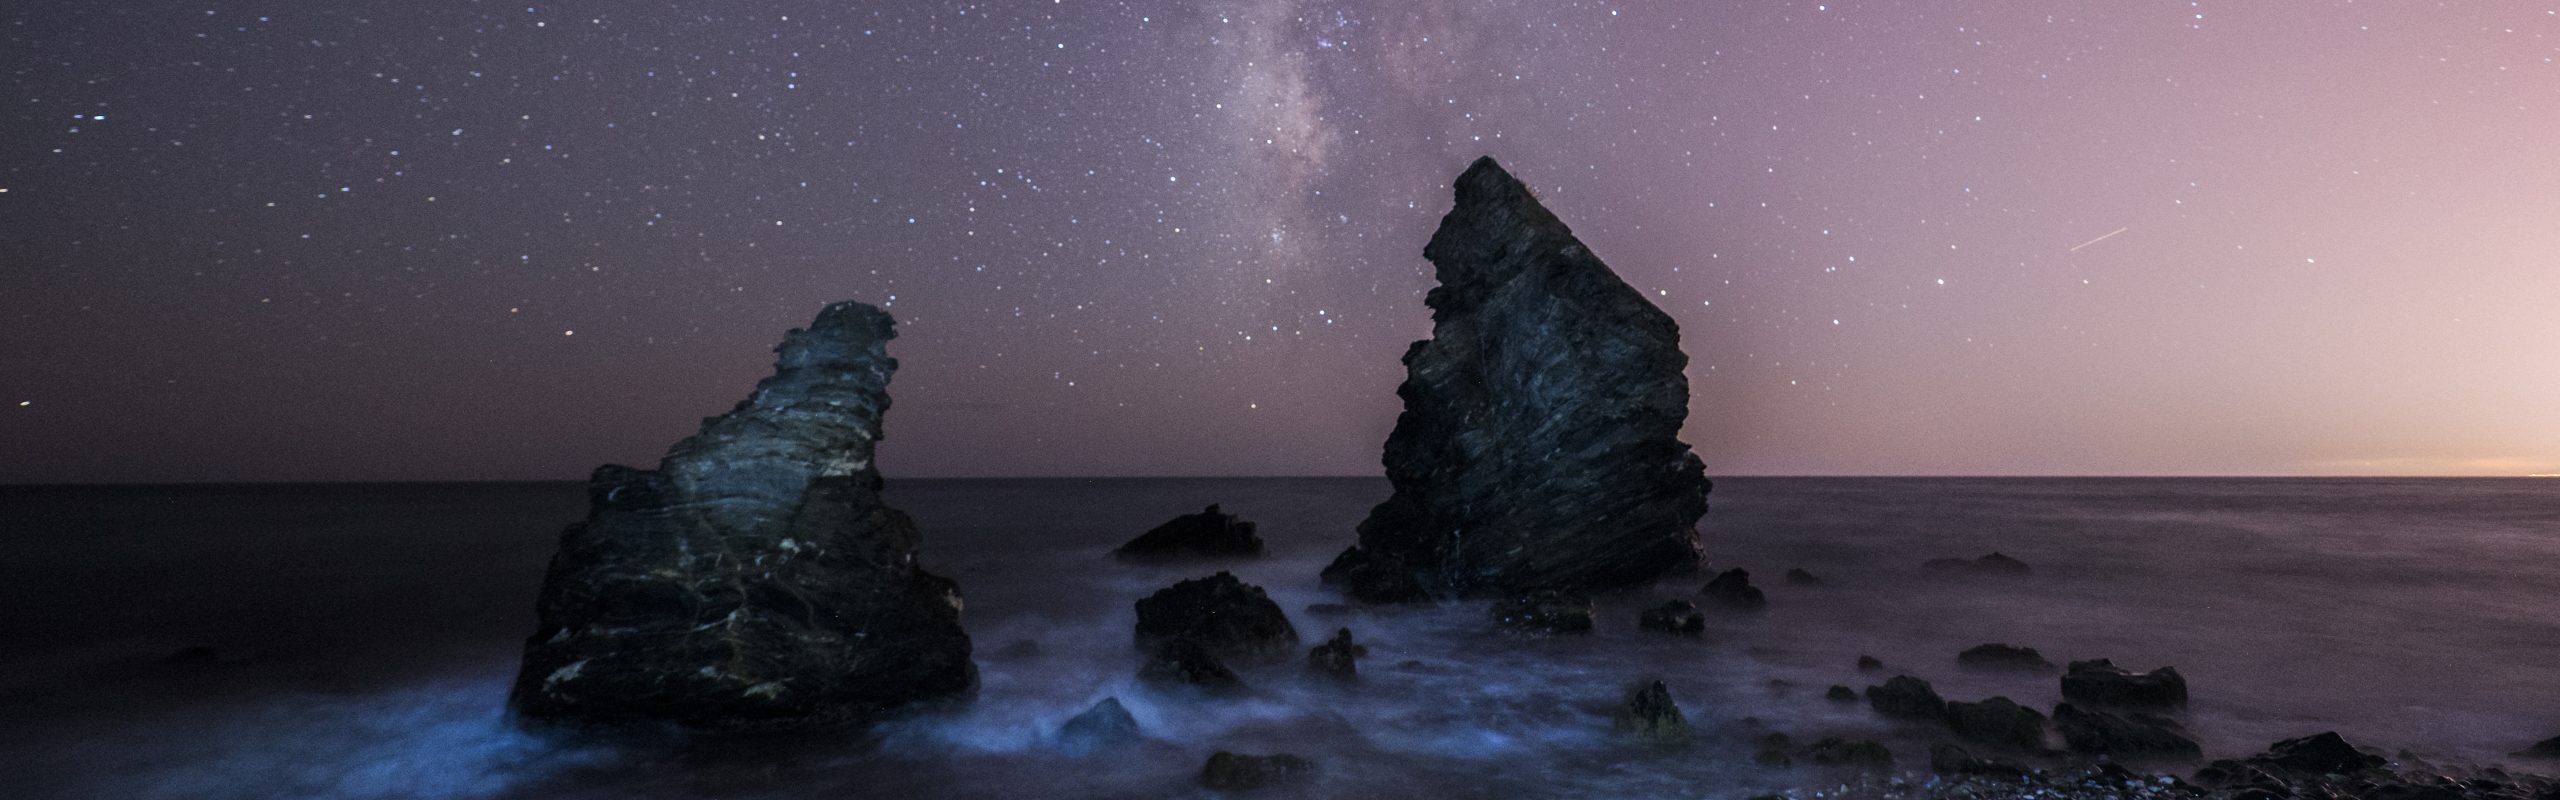 The Night Sky and Milky Way Over the Coast Cropped From an Image by Manolo Franco Hosted on Pixabay